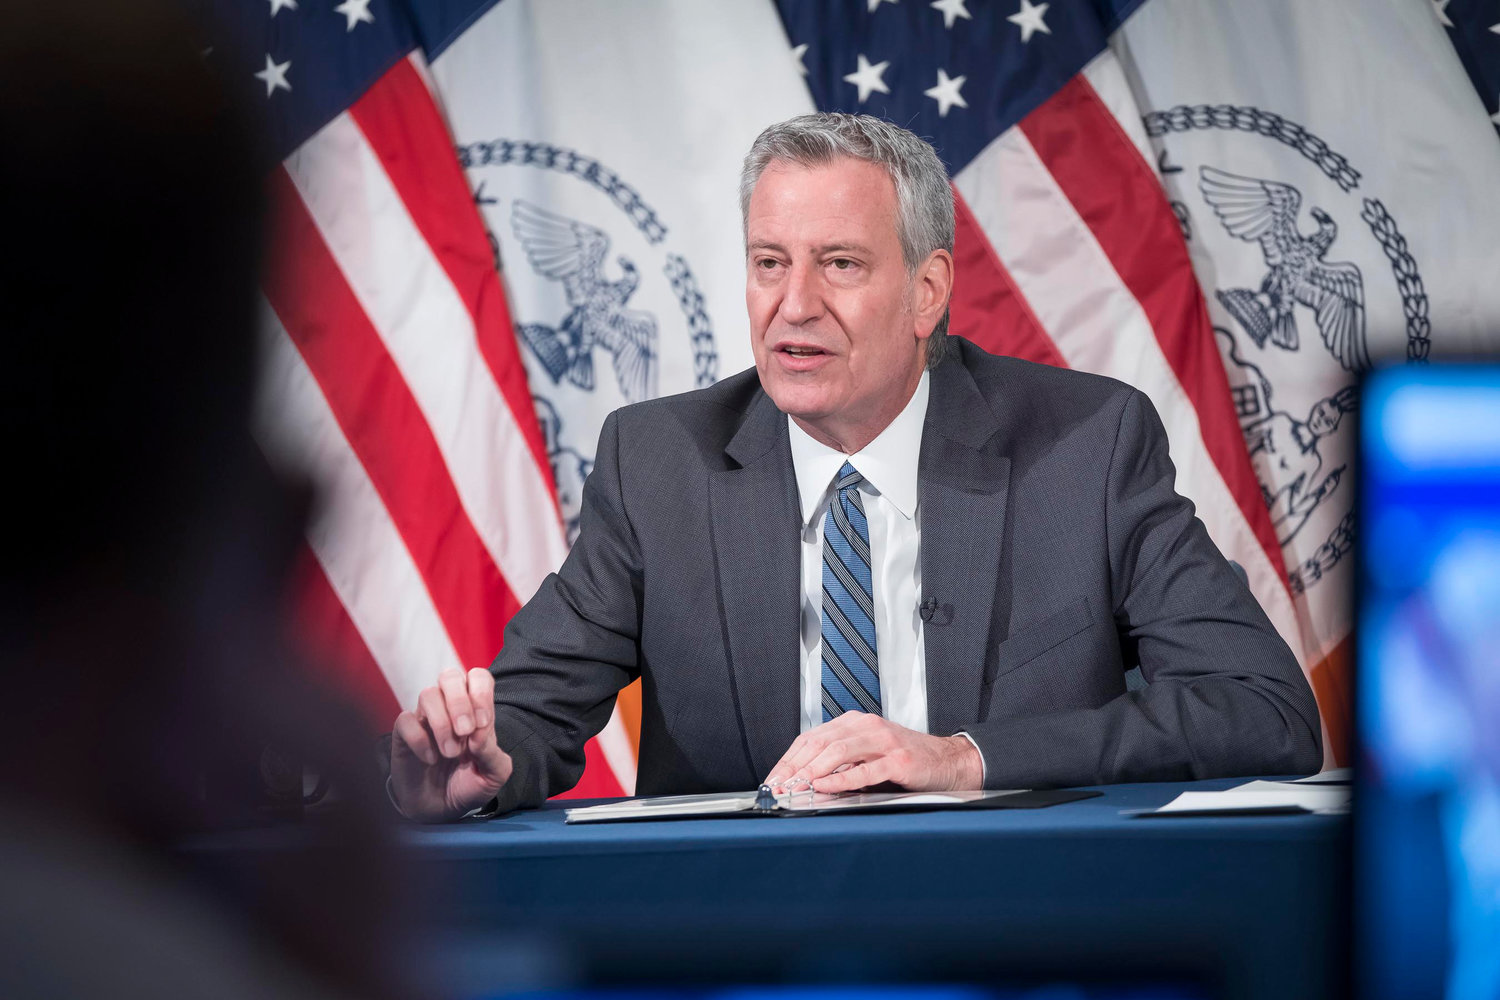 Mayor Bill deBlasio announced high school buildings would reopen March 22. This marks the first time all buildings will be allowed to have in-person classes since a system wide closure in November.